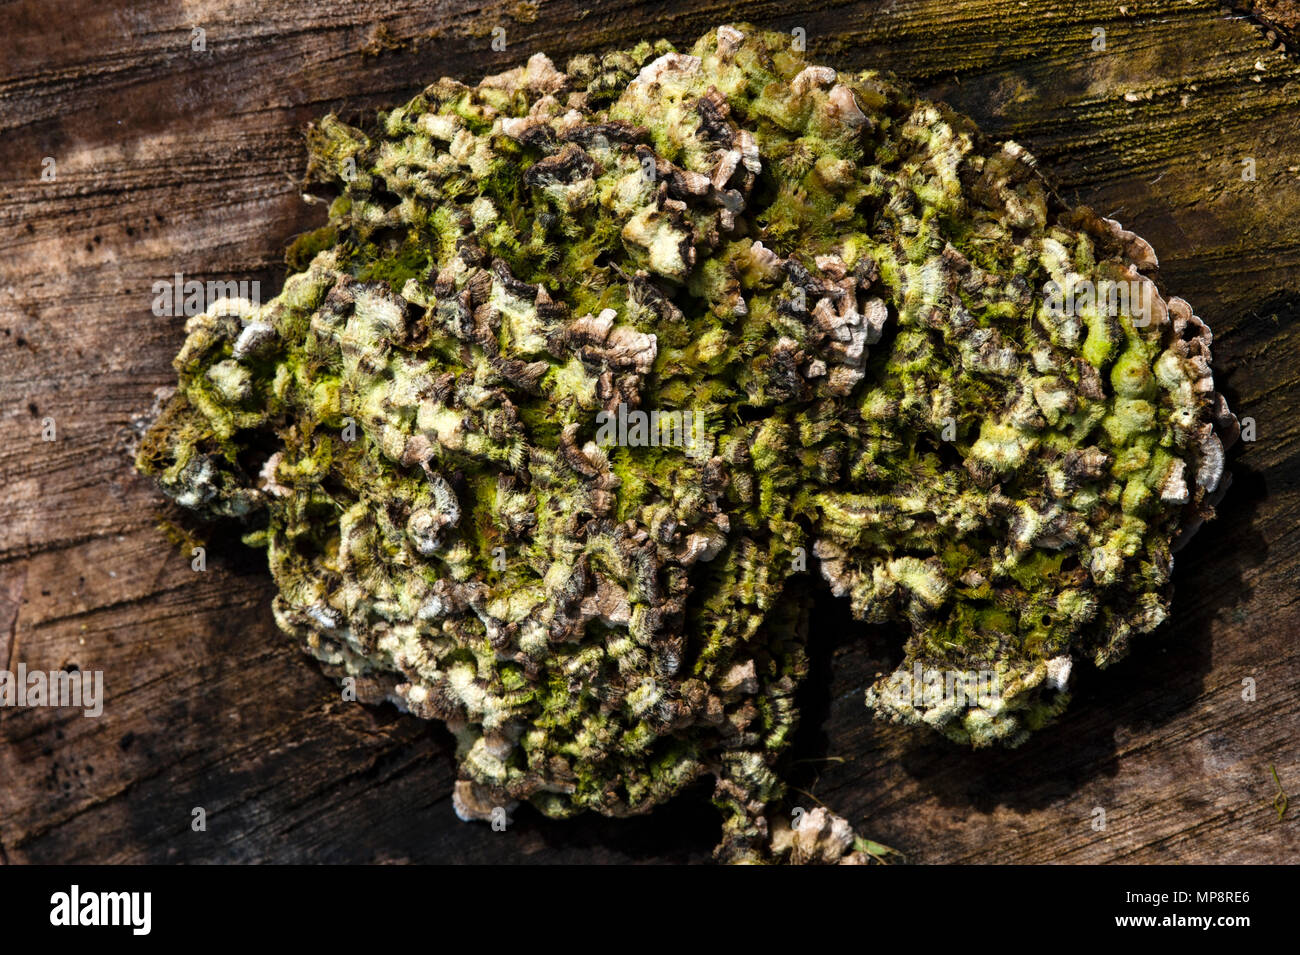 Tree stump with lichen and moss growing over wooden stump creating abstract shapes. Stock Photo